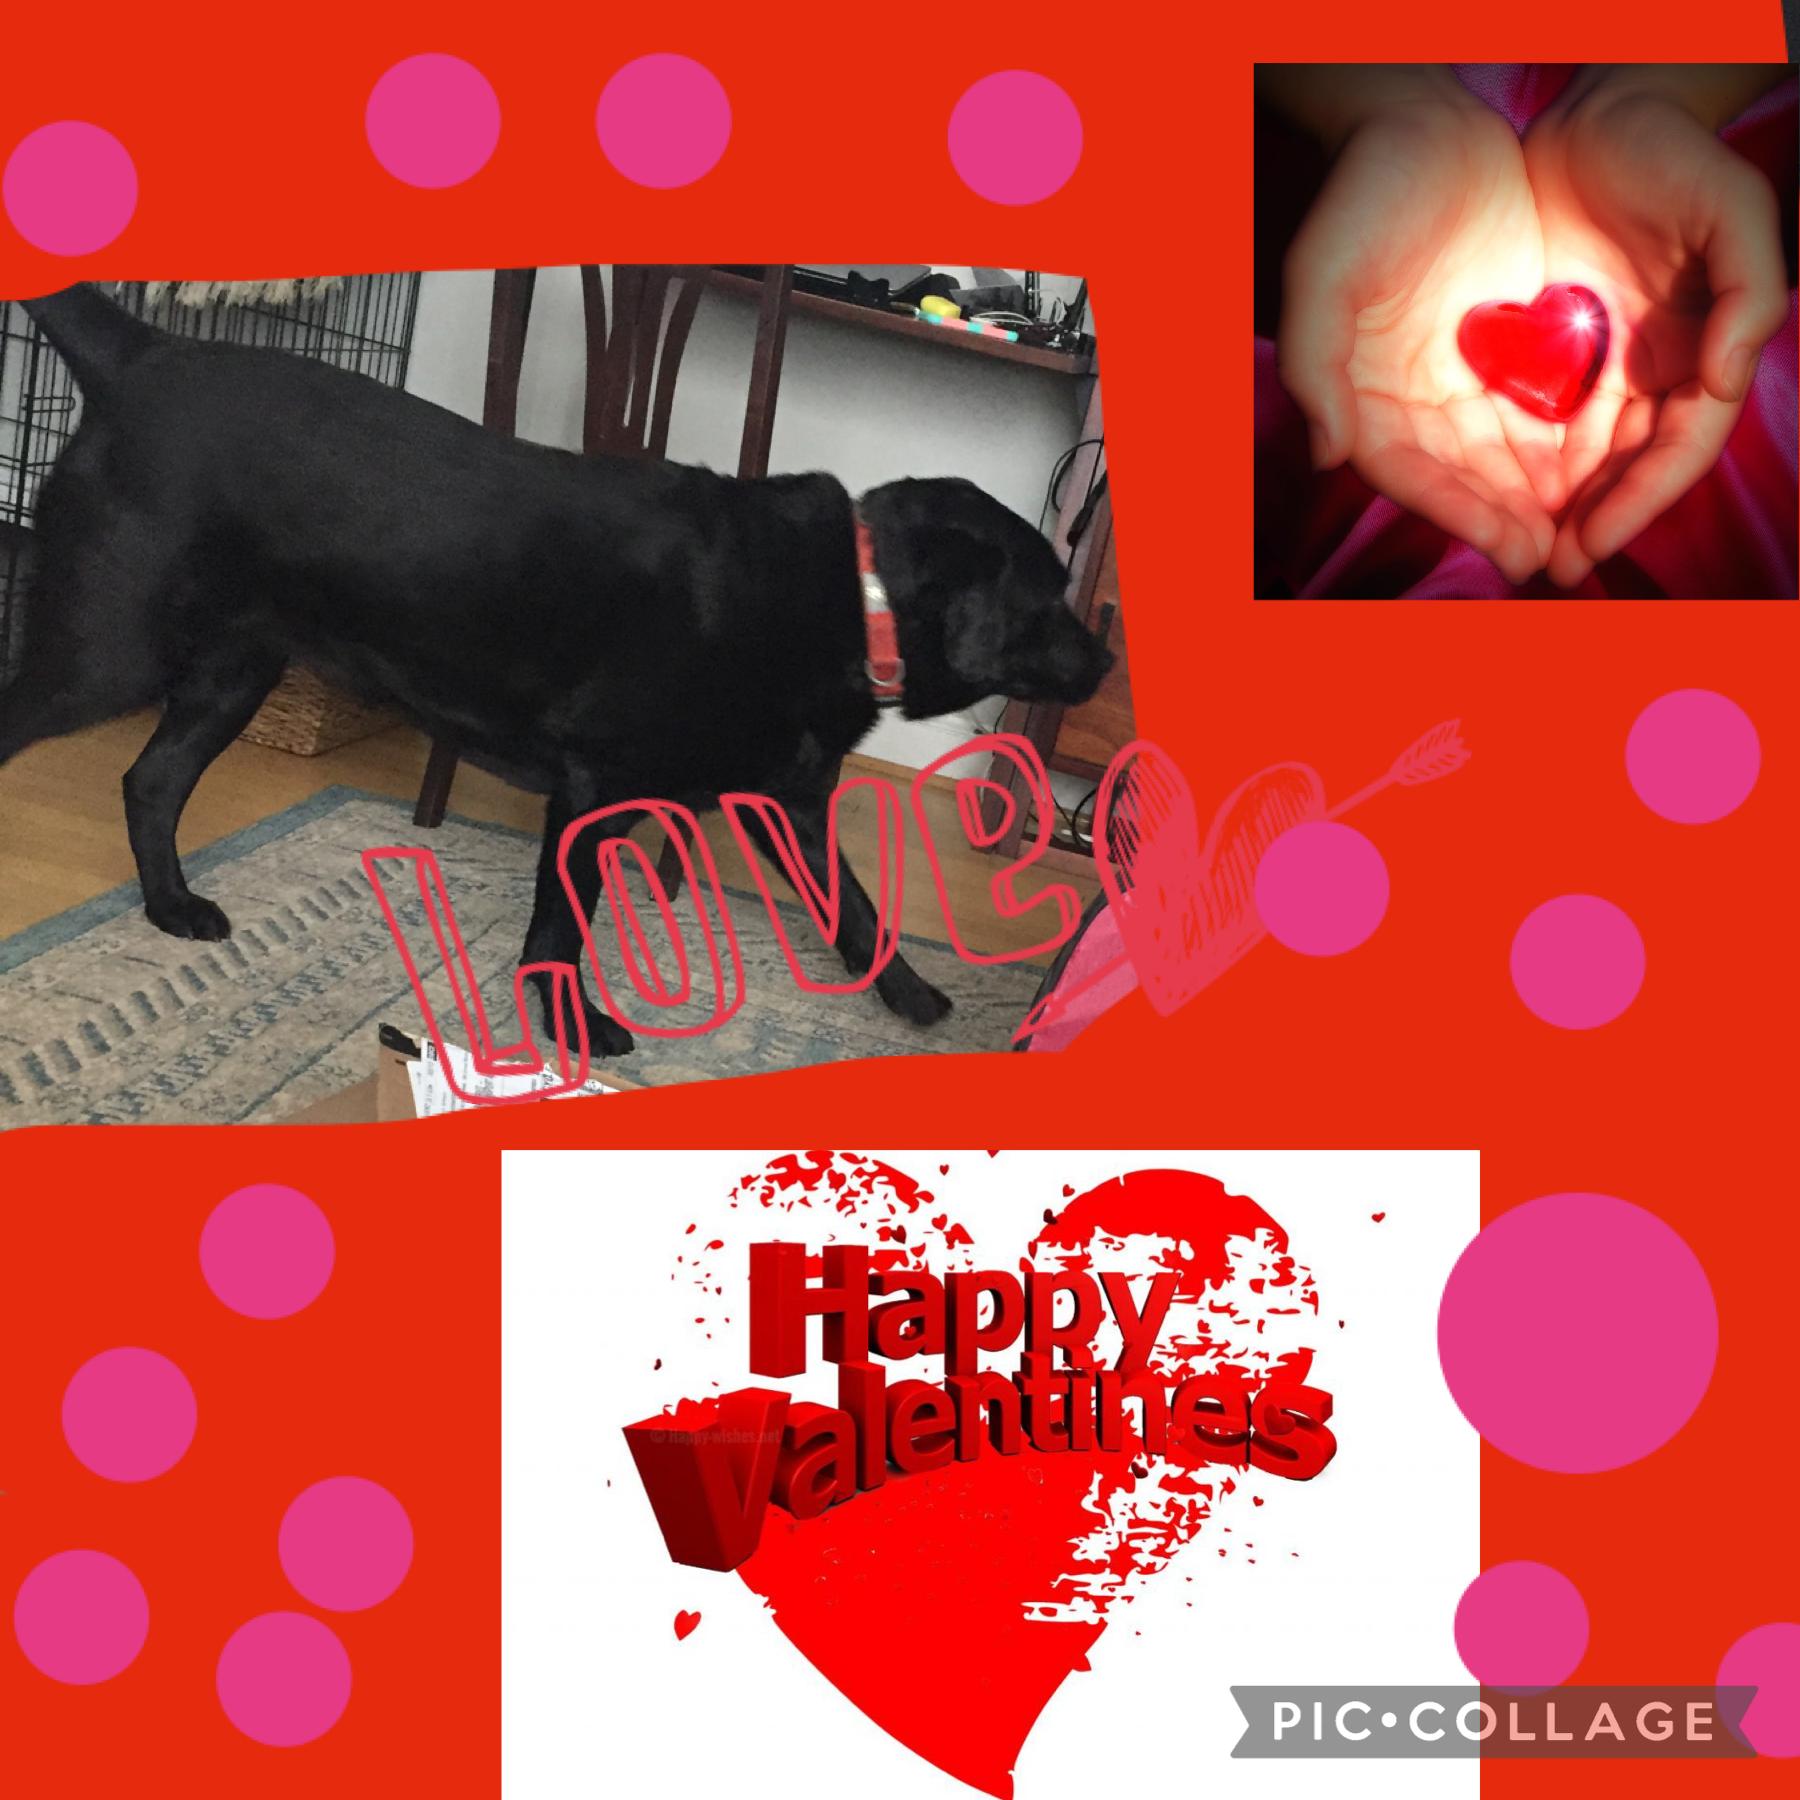 A Valentine’s Day edit of my dog, Sunny. I can edit your dogs with this theme. Just remix with a pic of your dog( can have background or your house). And I’ll edit it. 